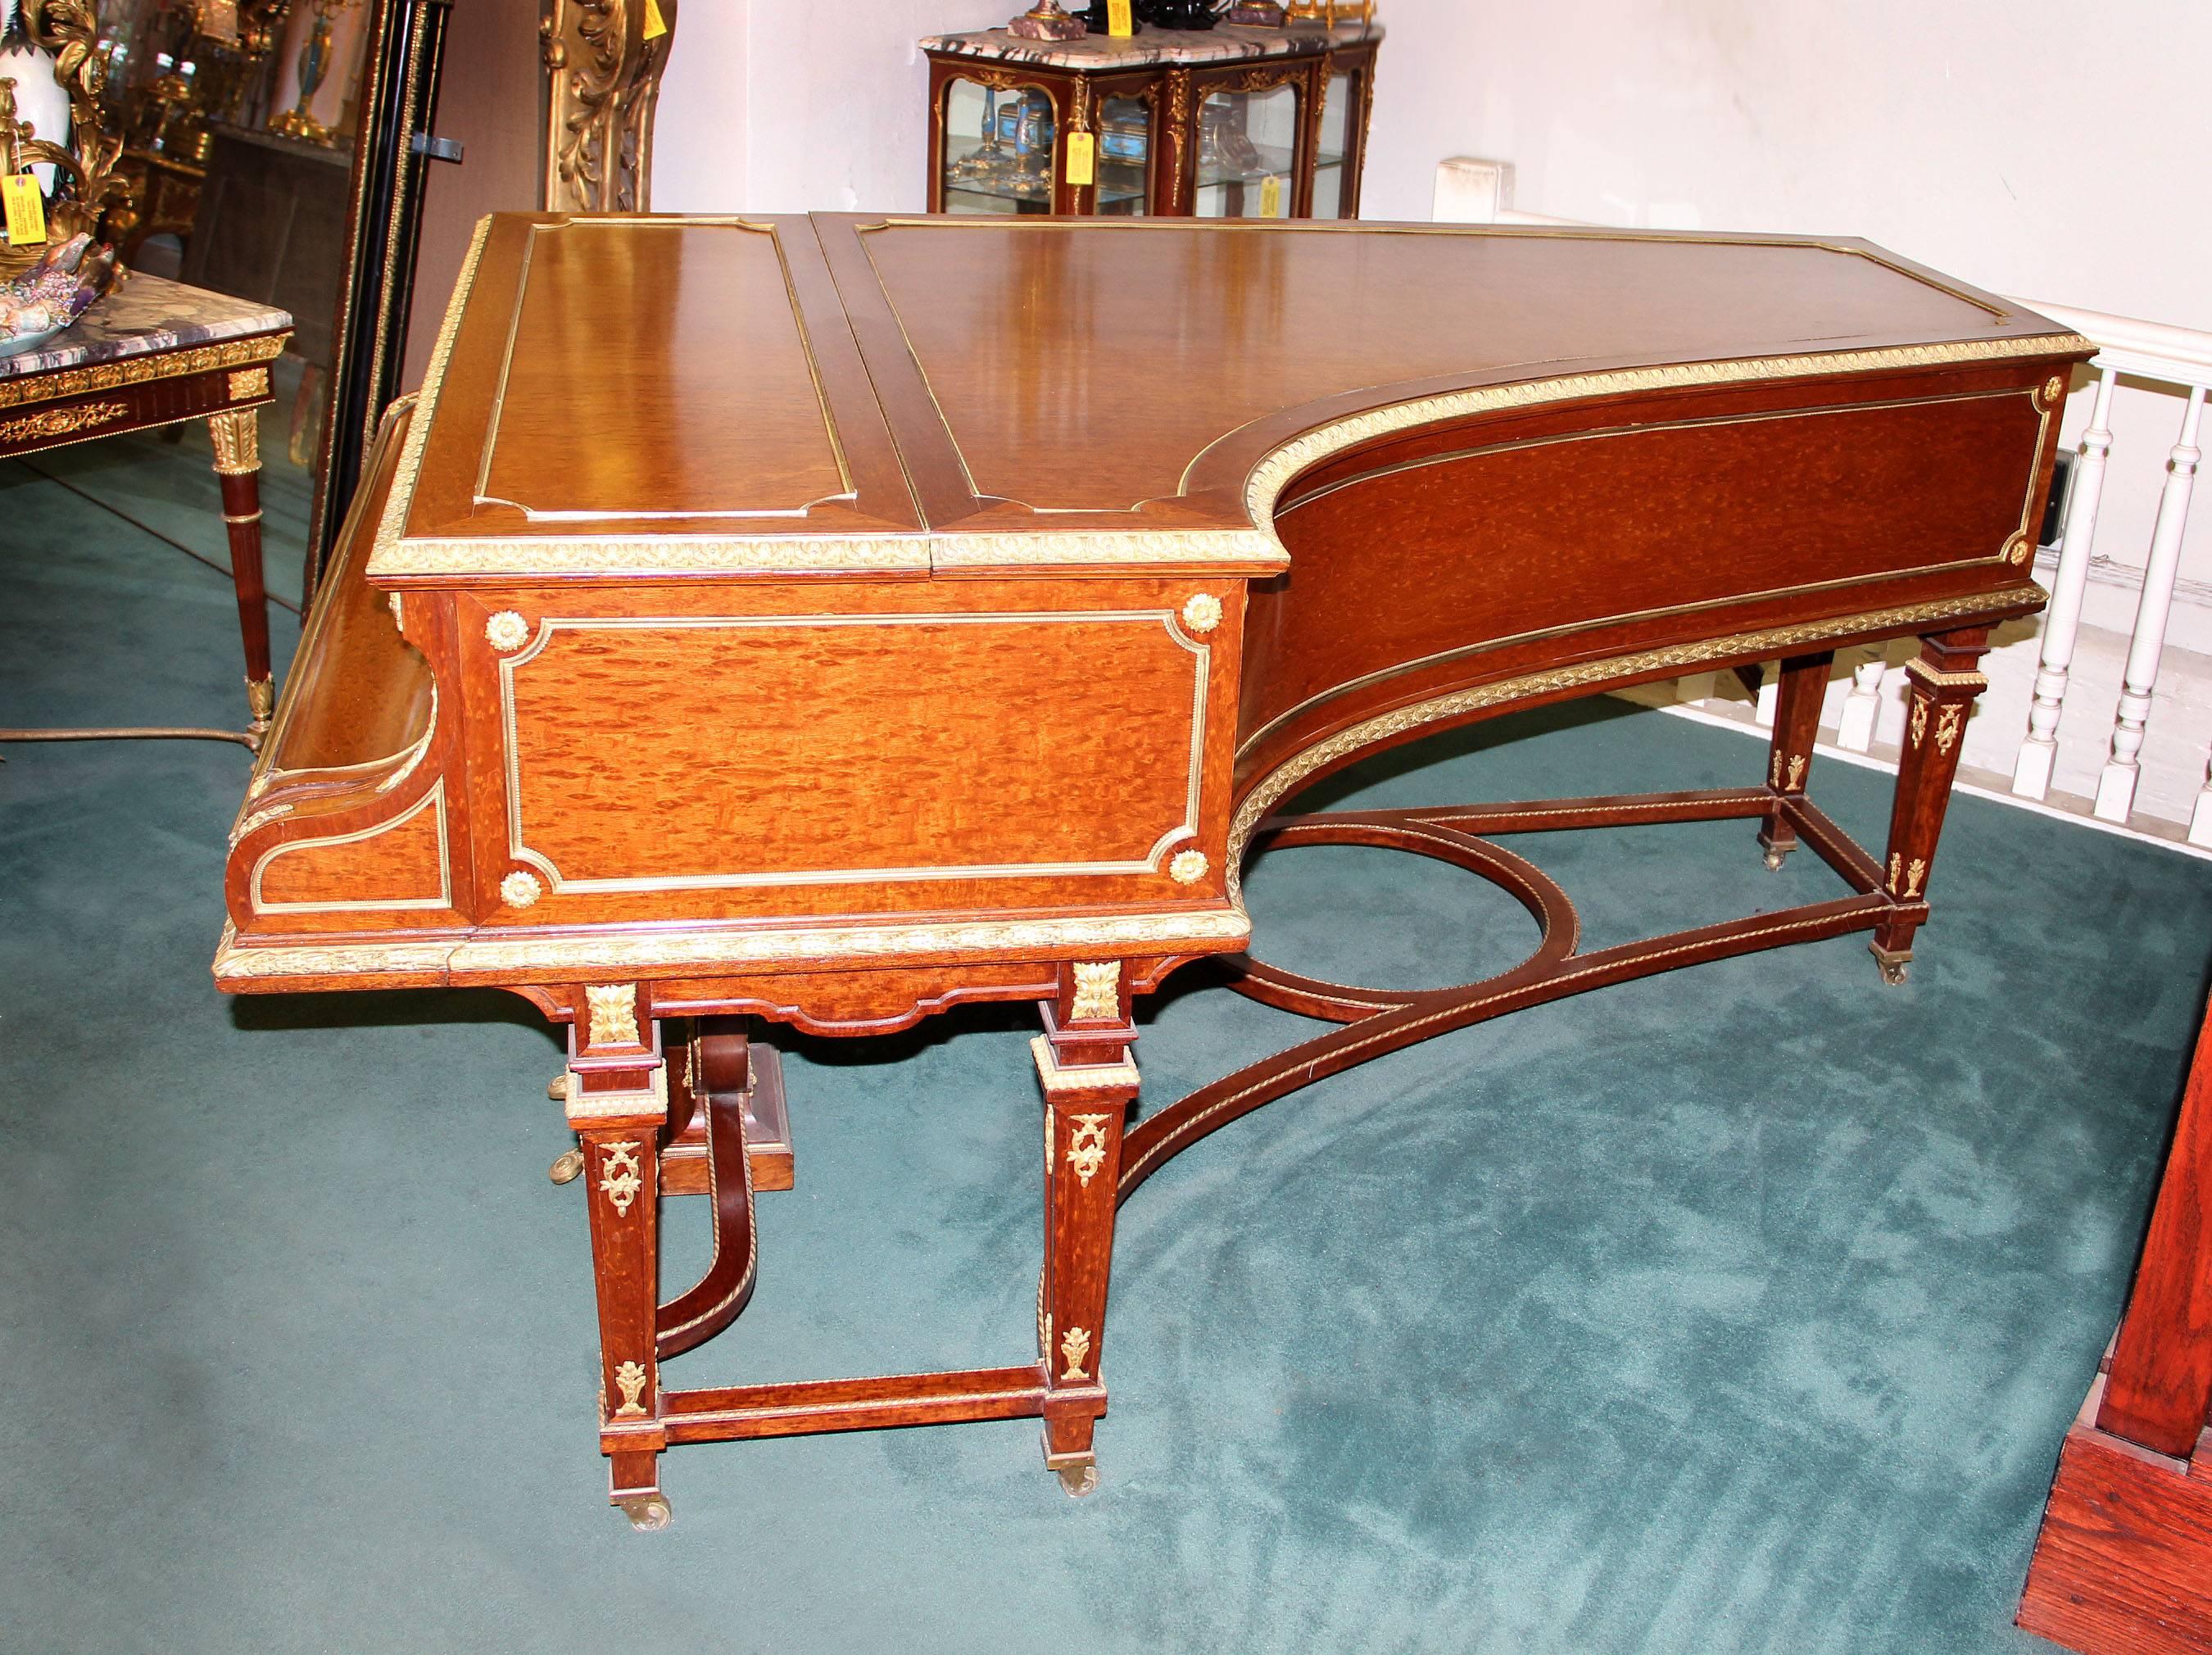 A wonderful turn-of-the-century gilt bronze mounted Louis XVI style six leg grand Erard Piano.

Beautiful plum mahogany veneer. Great quality floral and women bronze mounts, standing on six legs centered by a stretcher.

Erard serial number